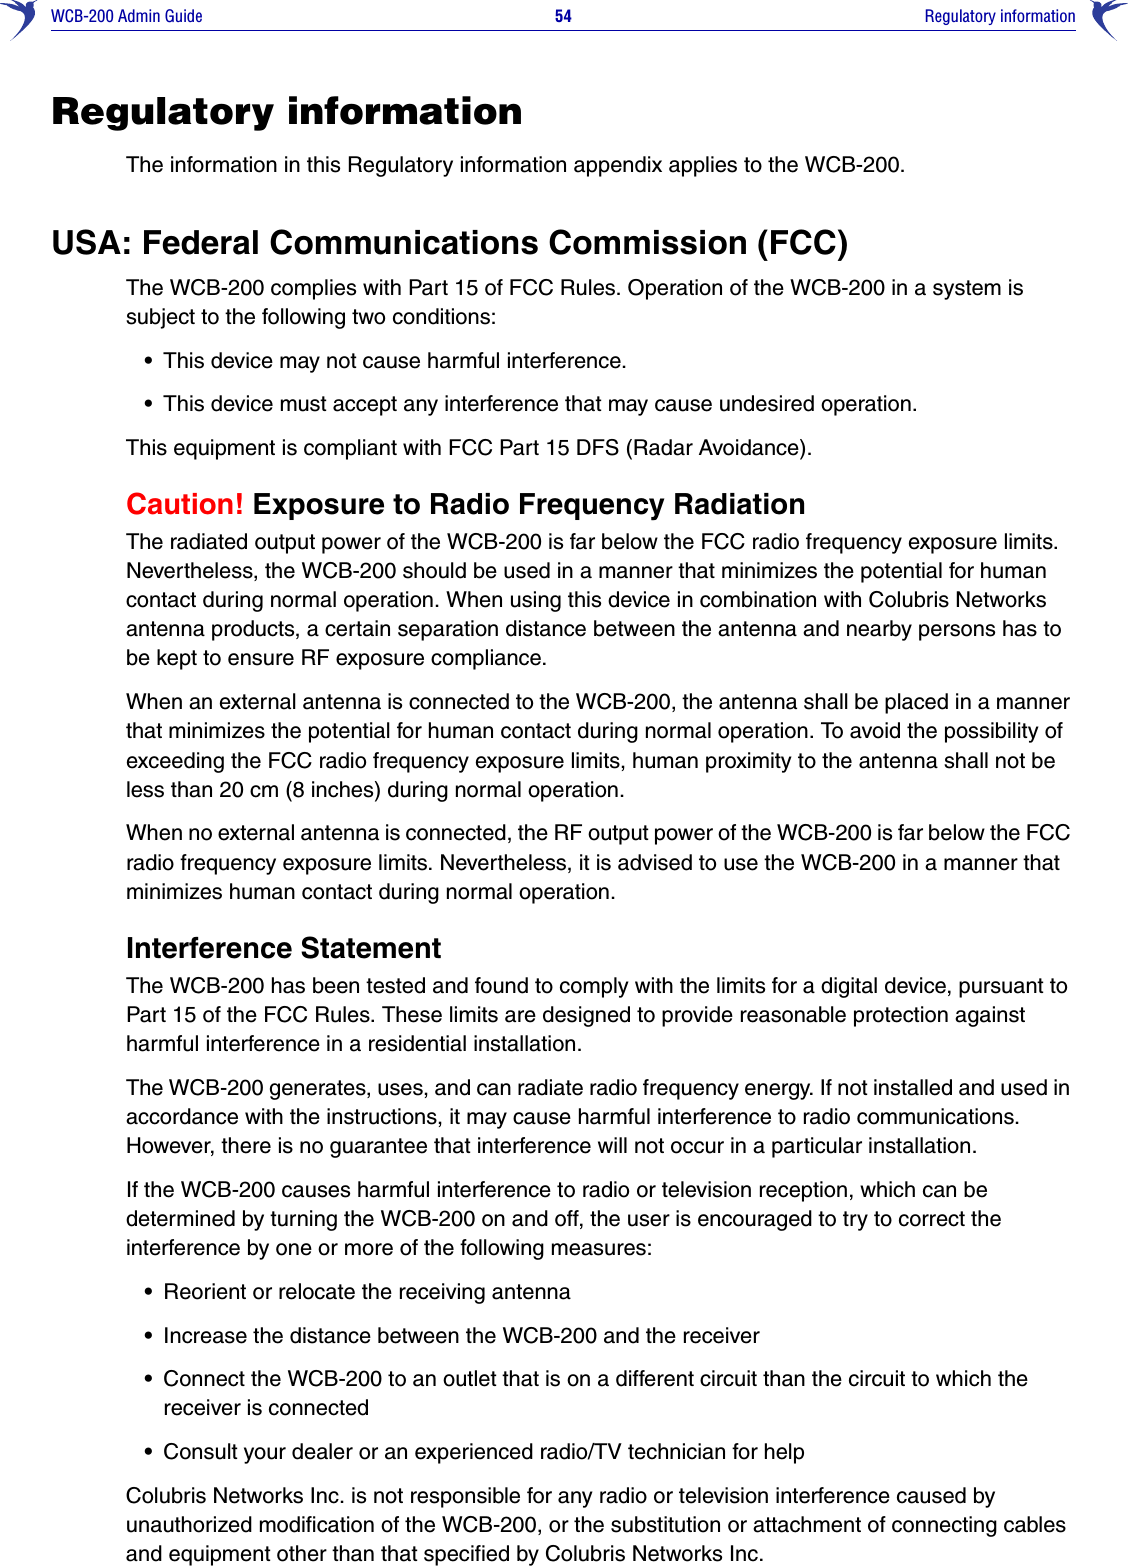 WCB-200 Admin Guide 54     Regulatory informationRegulatory informationThe information in this Regulatory information appendix applies to the WCB-200.USA: Federal Communications Commission (FCC)The WCB-200 complies with Part 15 of FCC Rules. Operation of the WCB-200 in a system is subject to the following two conditions:•This device may not cause harmful interference.•This device must accept any interference that may cause undesired operation.This equipment is compliant with FCC Part 15 DFS (Radar Avoidance).Caution! Exposure to Radio Frequency RadiationThe radiated output power of the WCB-200 is far below the FCC radio frequency exposure limits. Nevertheless, the WCB-200 should be used in a manner that minimizes the potential for human contact during normal operation. When using this device in combination with Colubris Networks antenna products, a certain separation distance between the antenna and nearby persons has to be kept to ensure RF exposure compliance.When an external antenna is connected to the WCB-200, the antenna shall be placed in a manner that minimizes the potential for human contact during normal operation. To avoid the possibility of exceeding the FCC radio frequency exposure limits, human proximity to the antenna shall not be less than 20 cm (8 inches) during normal operation.When no external antenna is connected, the RF output power of the WCB-200 is far below the FCC radio frequency exposure limits. Nevertheless, it is advised to use the WCB-200 in a manner that minimizes human contact during normal operation.Interference StatementThe WCB-200 has been tested and found to comply with the limits for a digital device, pursuant to Part 15 of the FCC Rules. These limits are designed to provide reasonable protection against harmful interference in a residential installation.The WCB-200 generates, uses, and can radiate radio frequency energy. If not installed and used in accordance with the instructions, it may cause harmful interference to radio communications. However, there is no guarantee that interference will not occur in a particular installation.If the WCB-200 causes harmful interference to radio or television reception, which can be determined by turning the WCB-200 on and off, the user is encouraged to try to correct the interference by one or more of the following measures:•Reorient or relocate the receiving antenna•Increase the distance between the WCB-200 and the receiver•Connect the WCB-200 to an outlet that is on a different circuit than the circuit to which the receiver is connected•Consult your dealer or an experienced radio/TV technician for helpColubris Networks Inc. is not responsible for any radio or television interference caused by unauthorized modification of the WCB-200, or the substitution or attachment of connecting cables and equipment other than that specified by Colubris Networks Inc. 